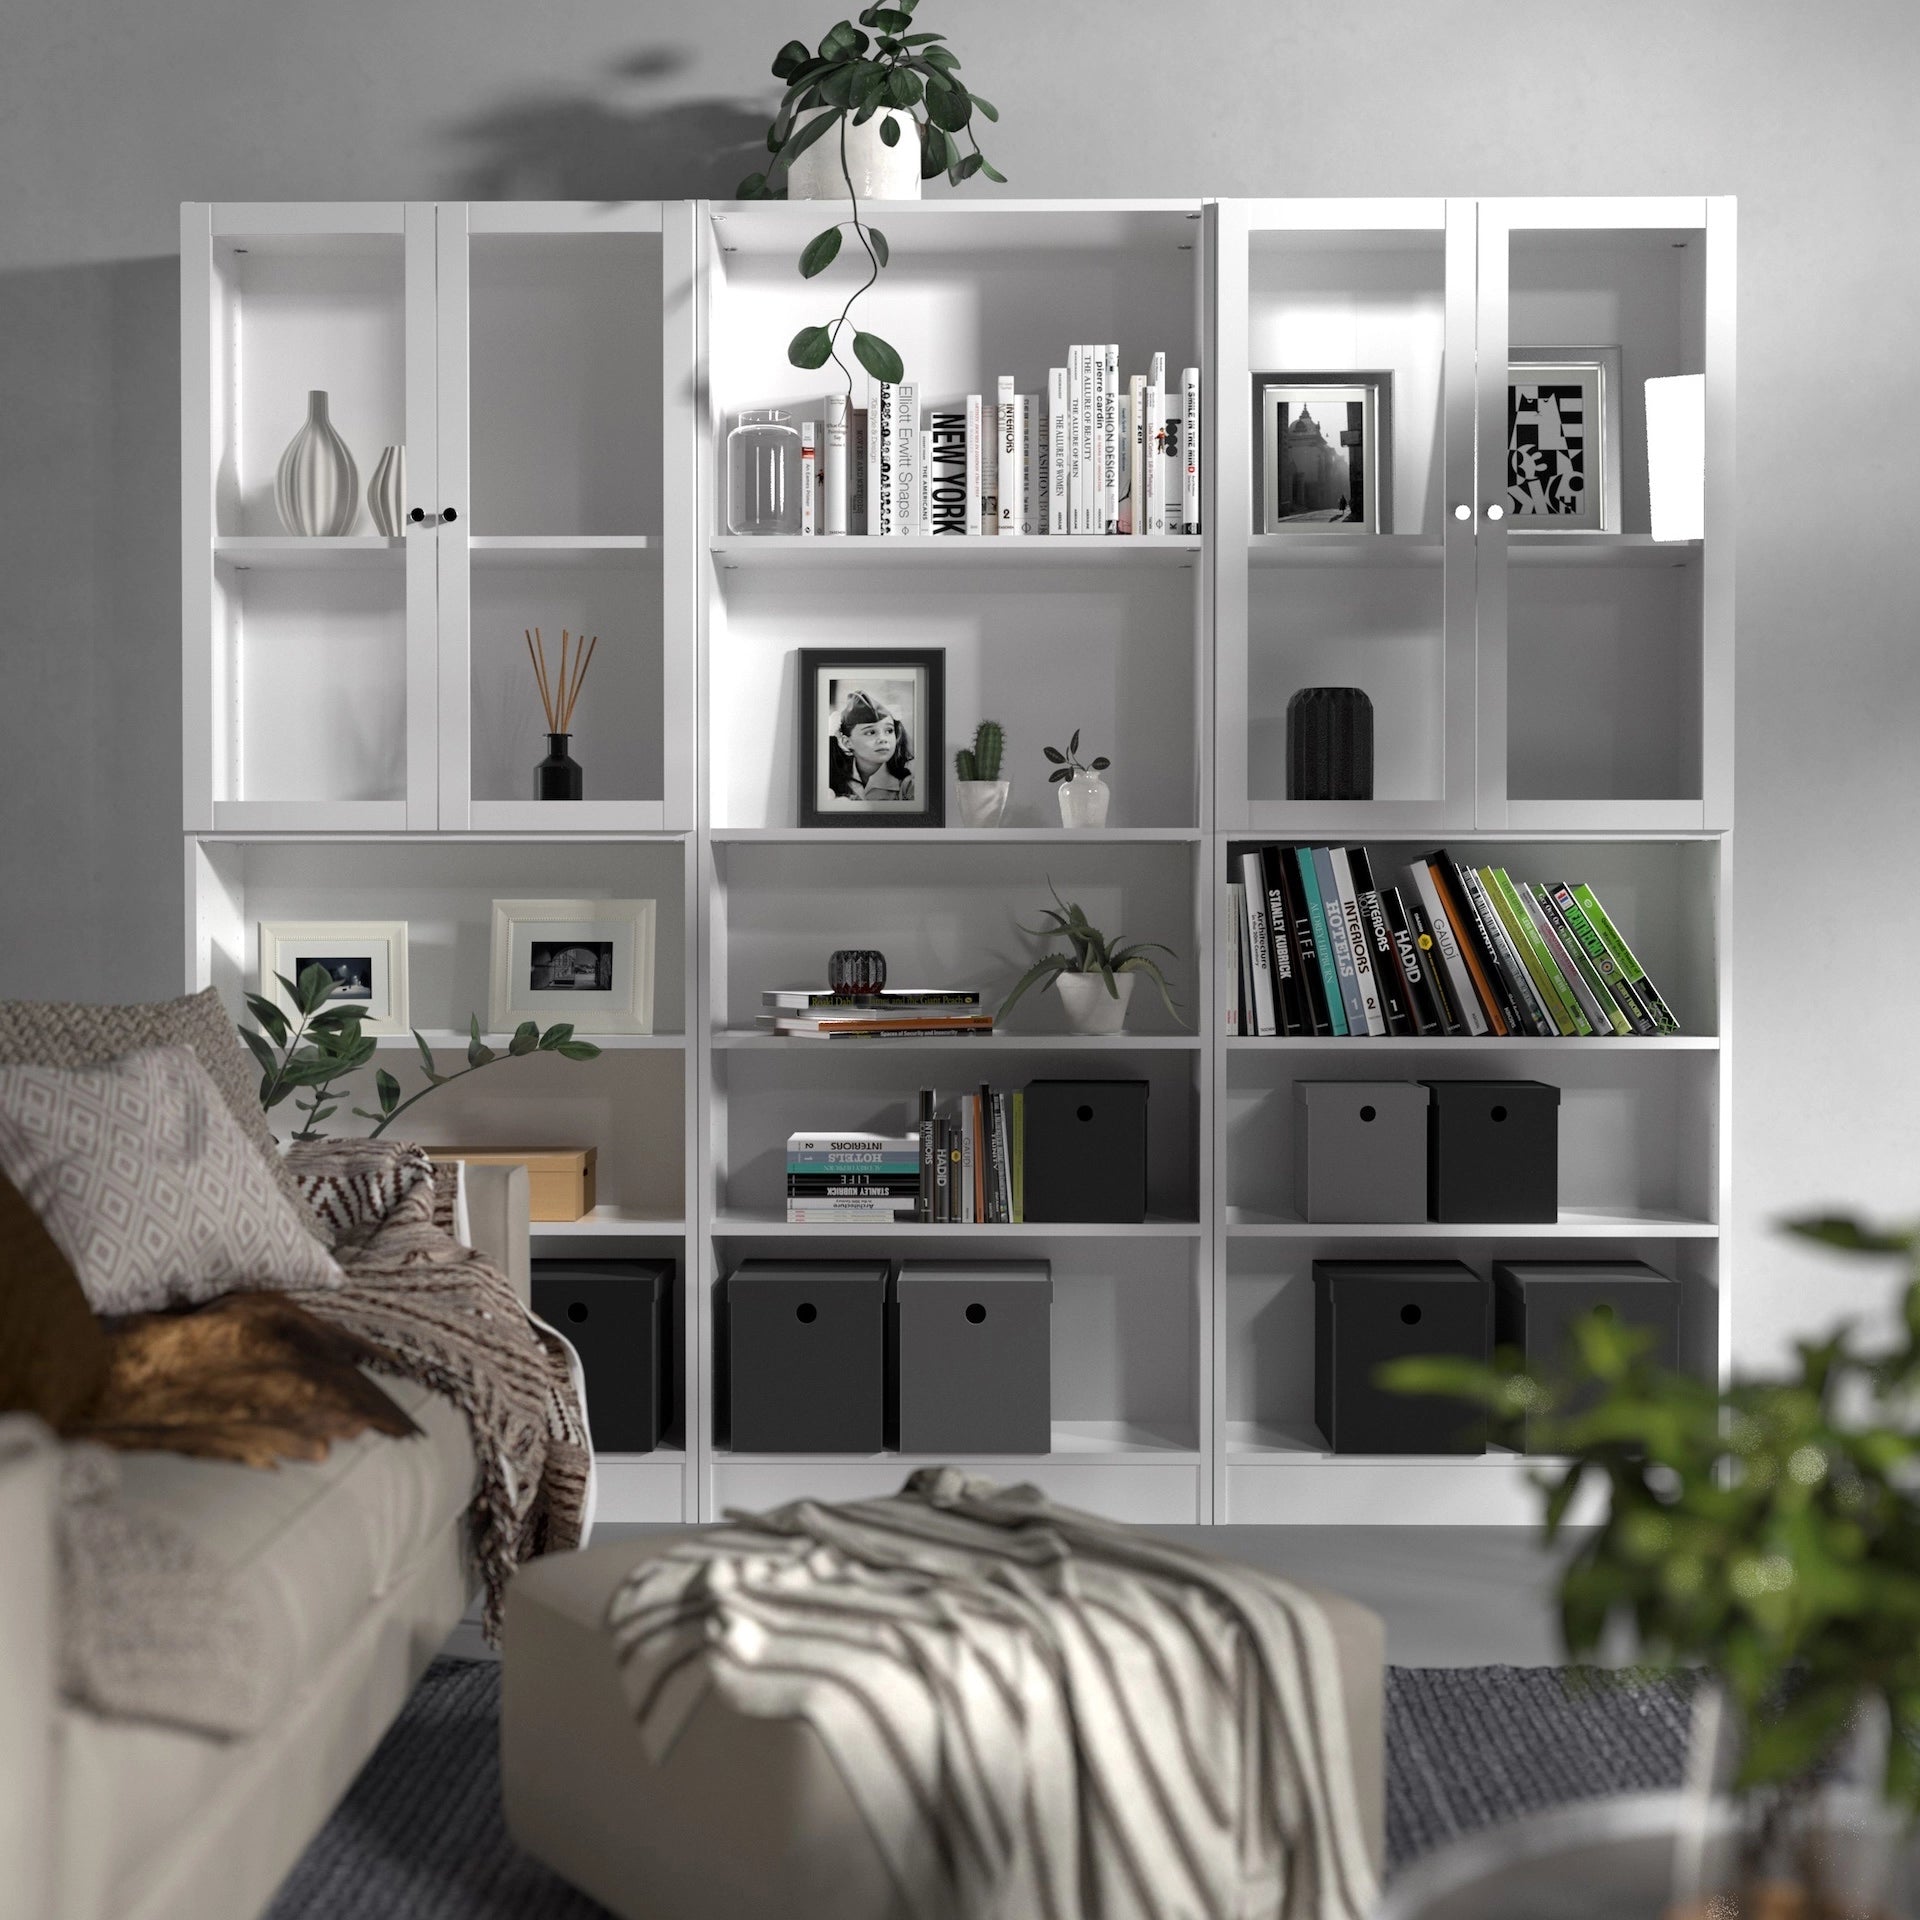 Furniture To Go Basic Tall Wide Bookcase (4 Shelves) in White